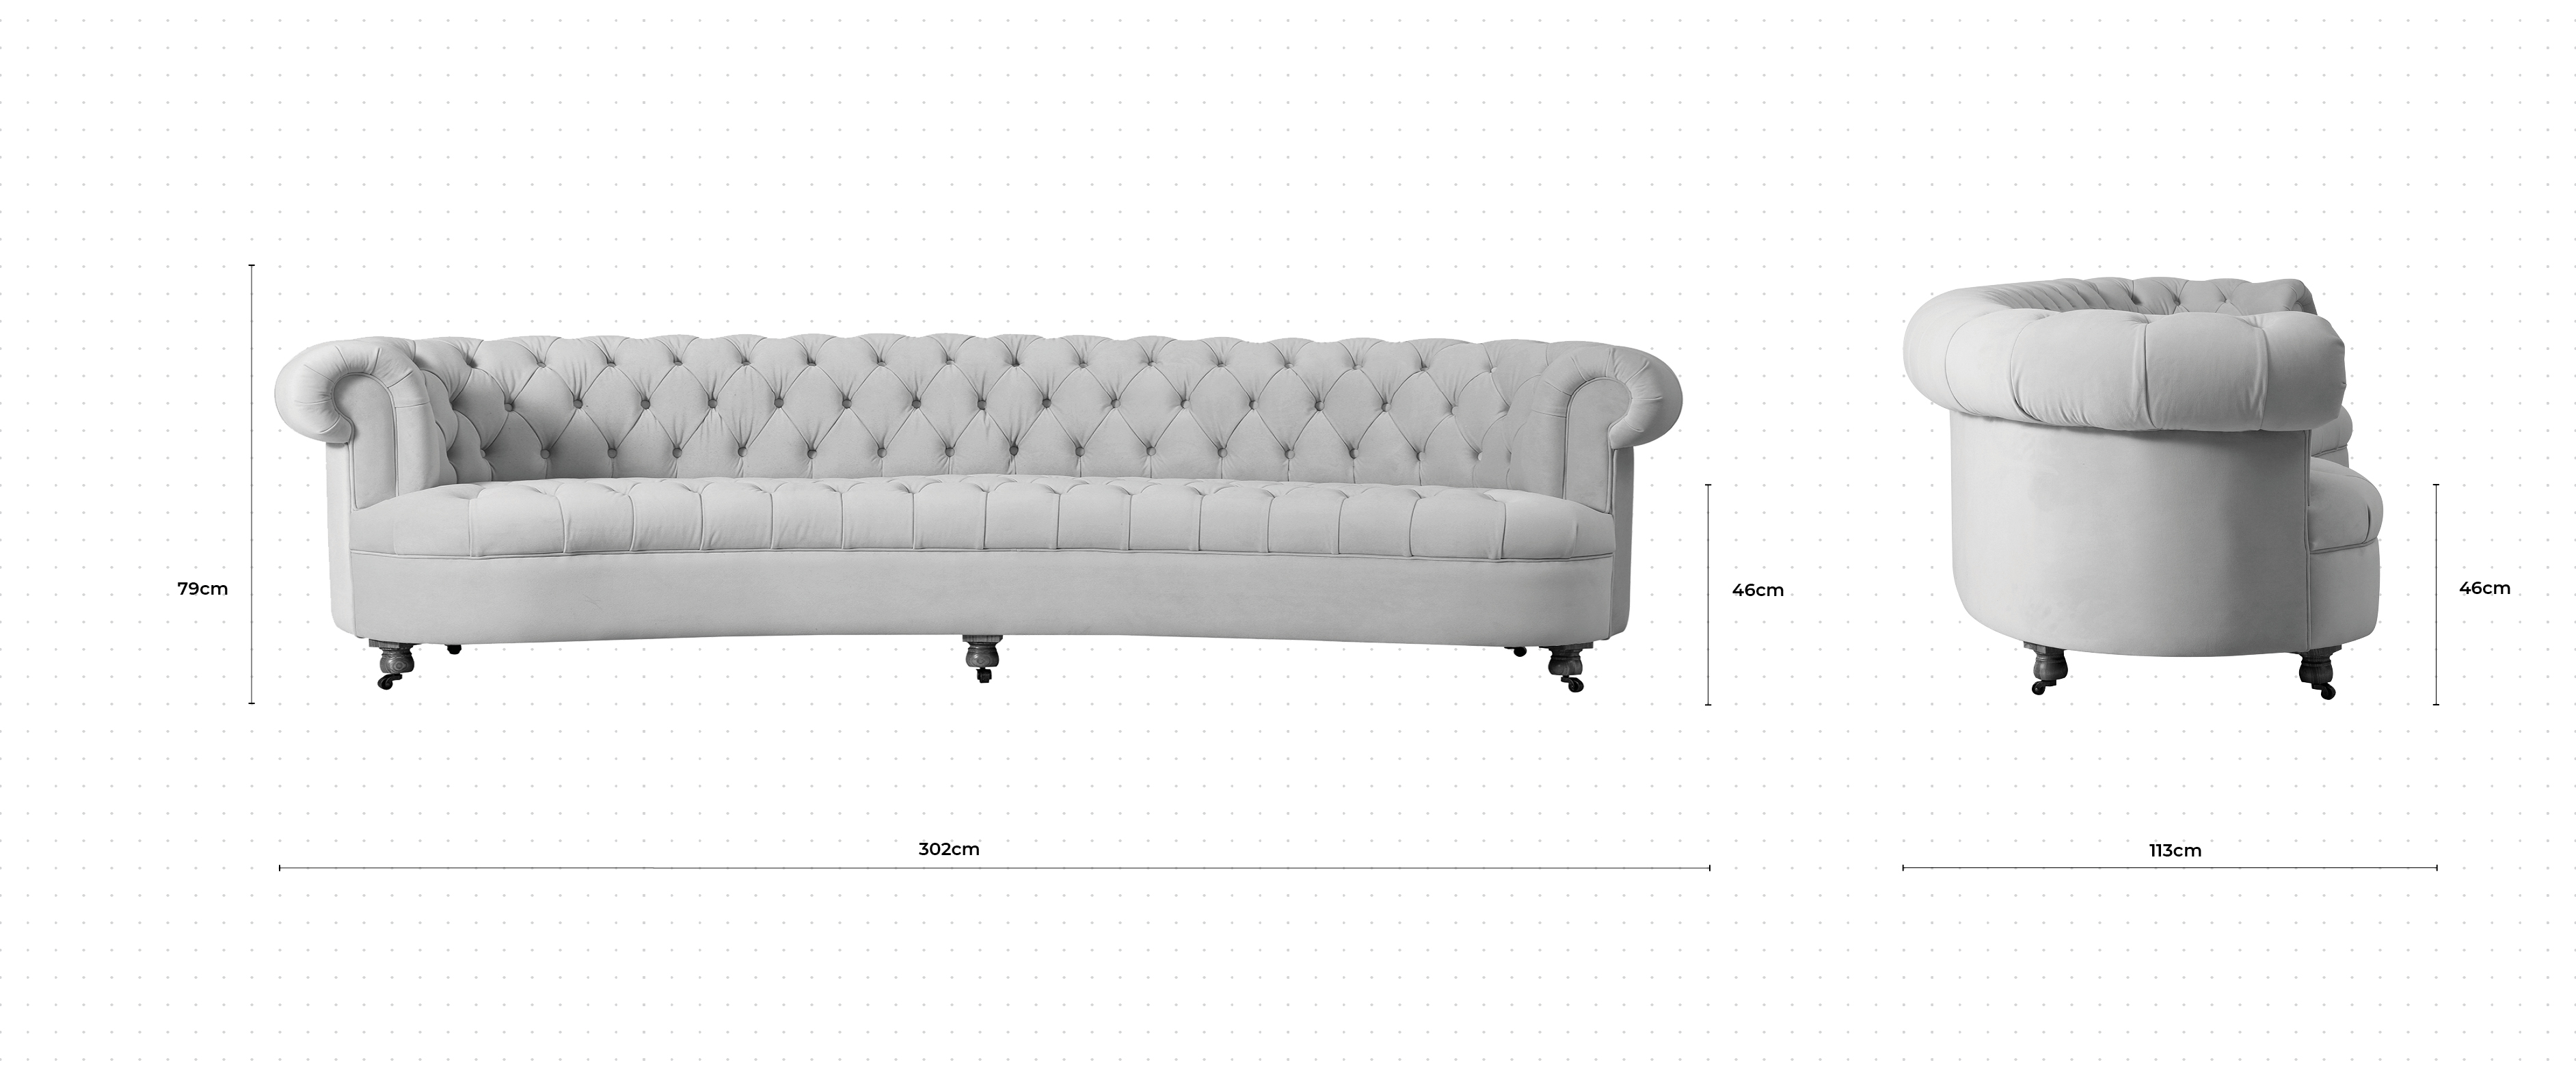 Leicester 4 Seater Sofa dimensions